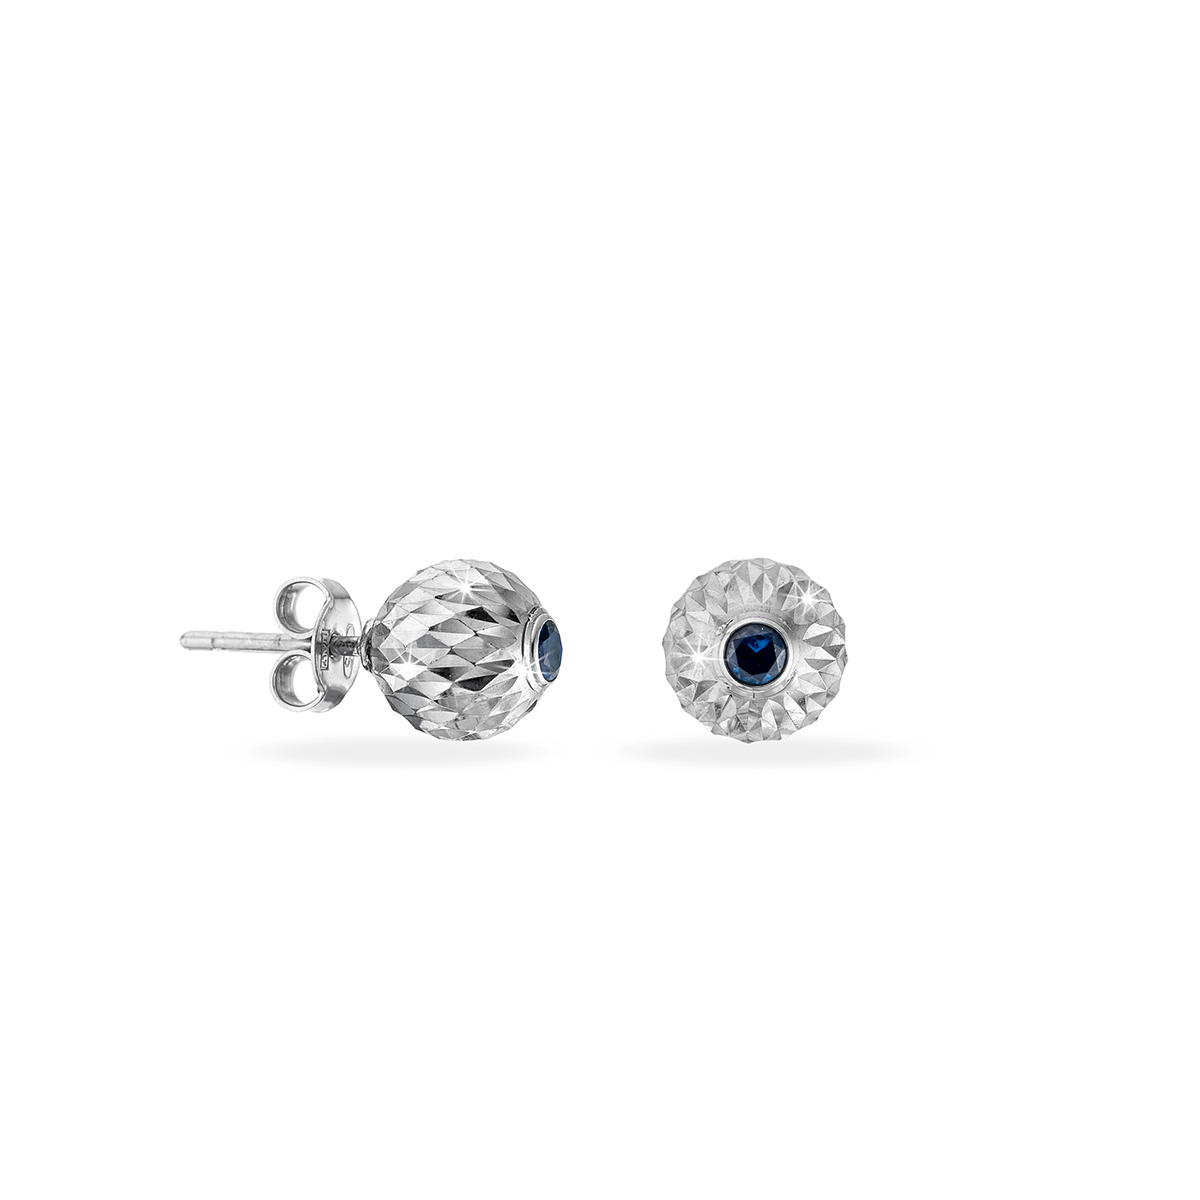 Sterling Silver and Blue Topaz Stud Earrings